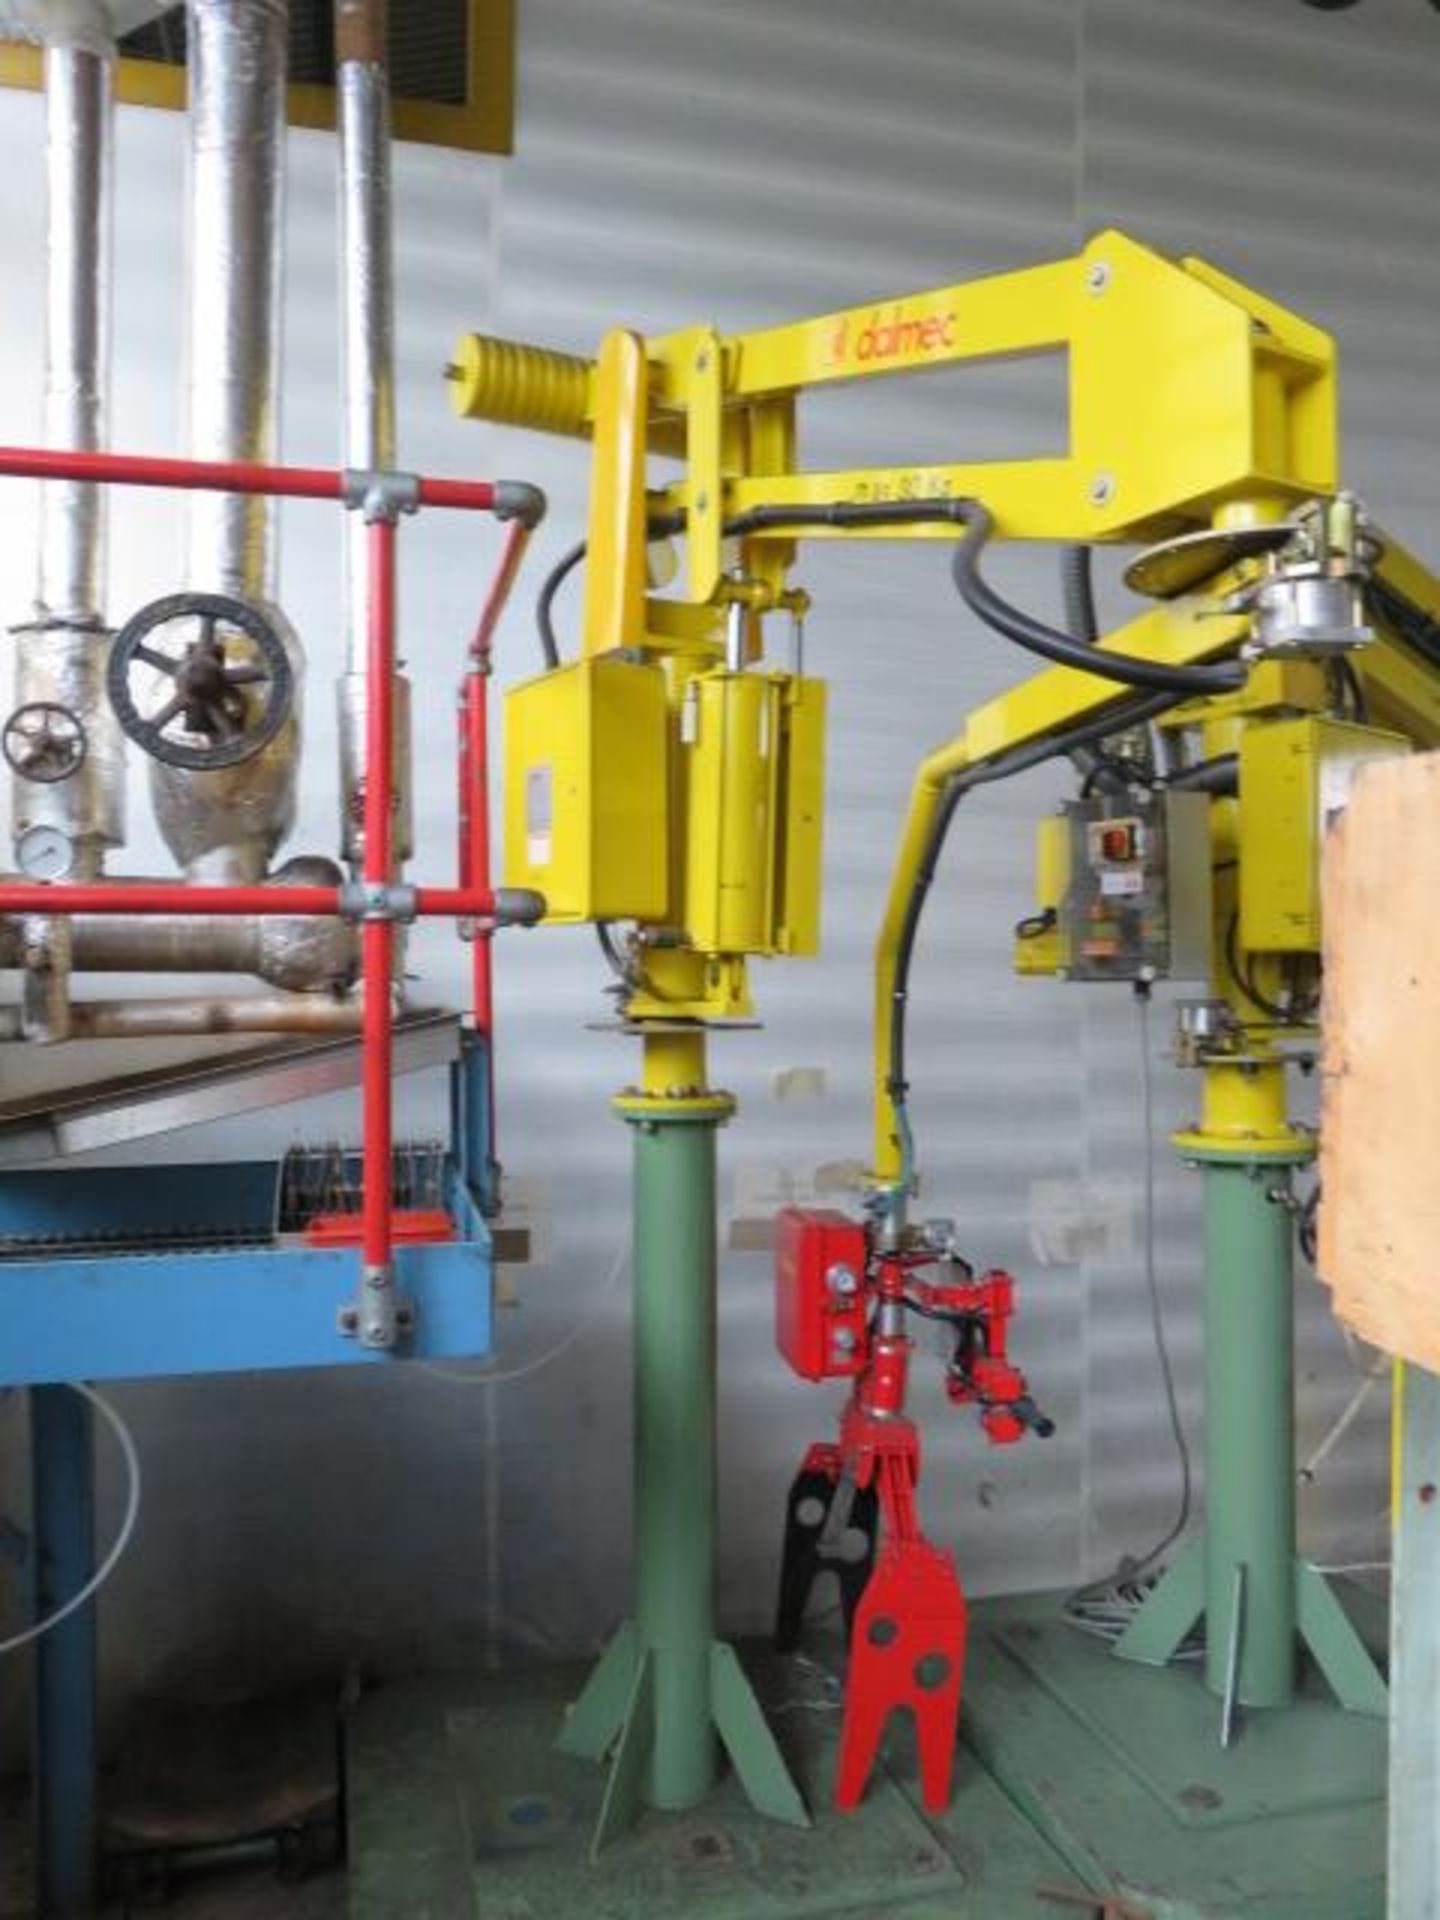 1 Dalmec PRC Mobile Industrial Manipulator. Serial No. 9715403 (1997) with 30kg Max Load and Clamp